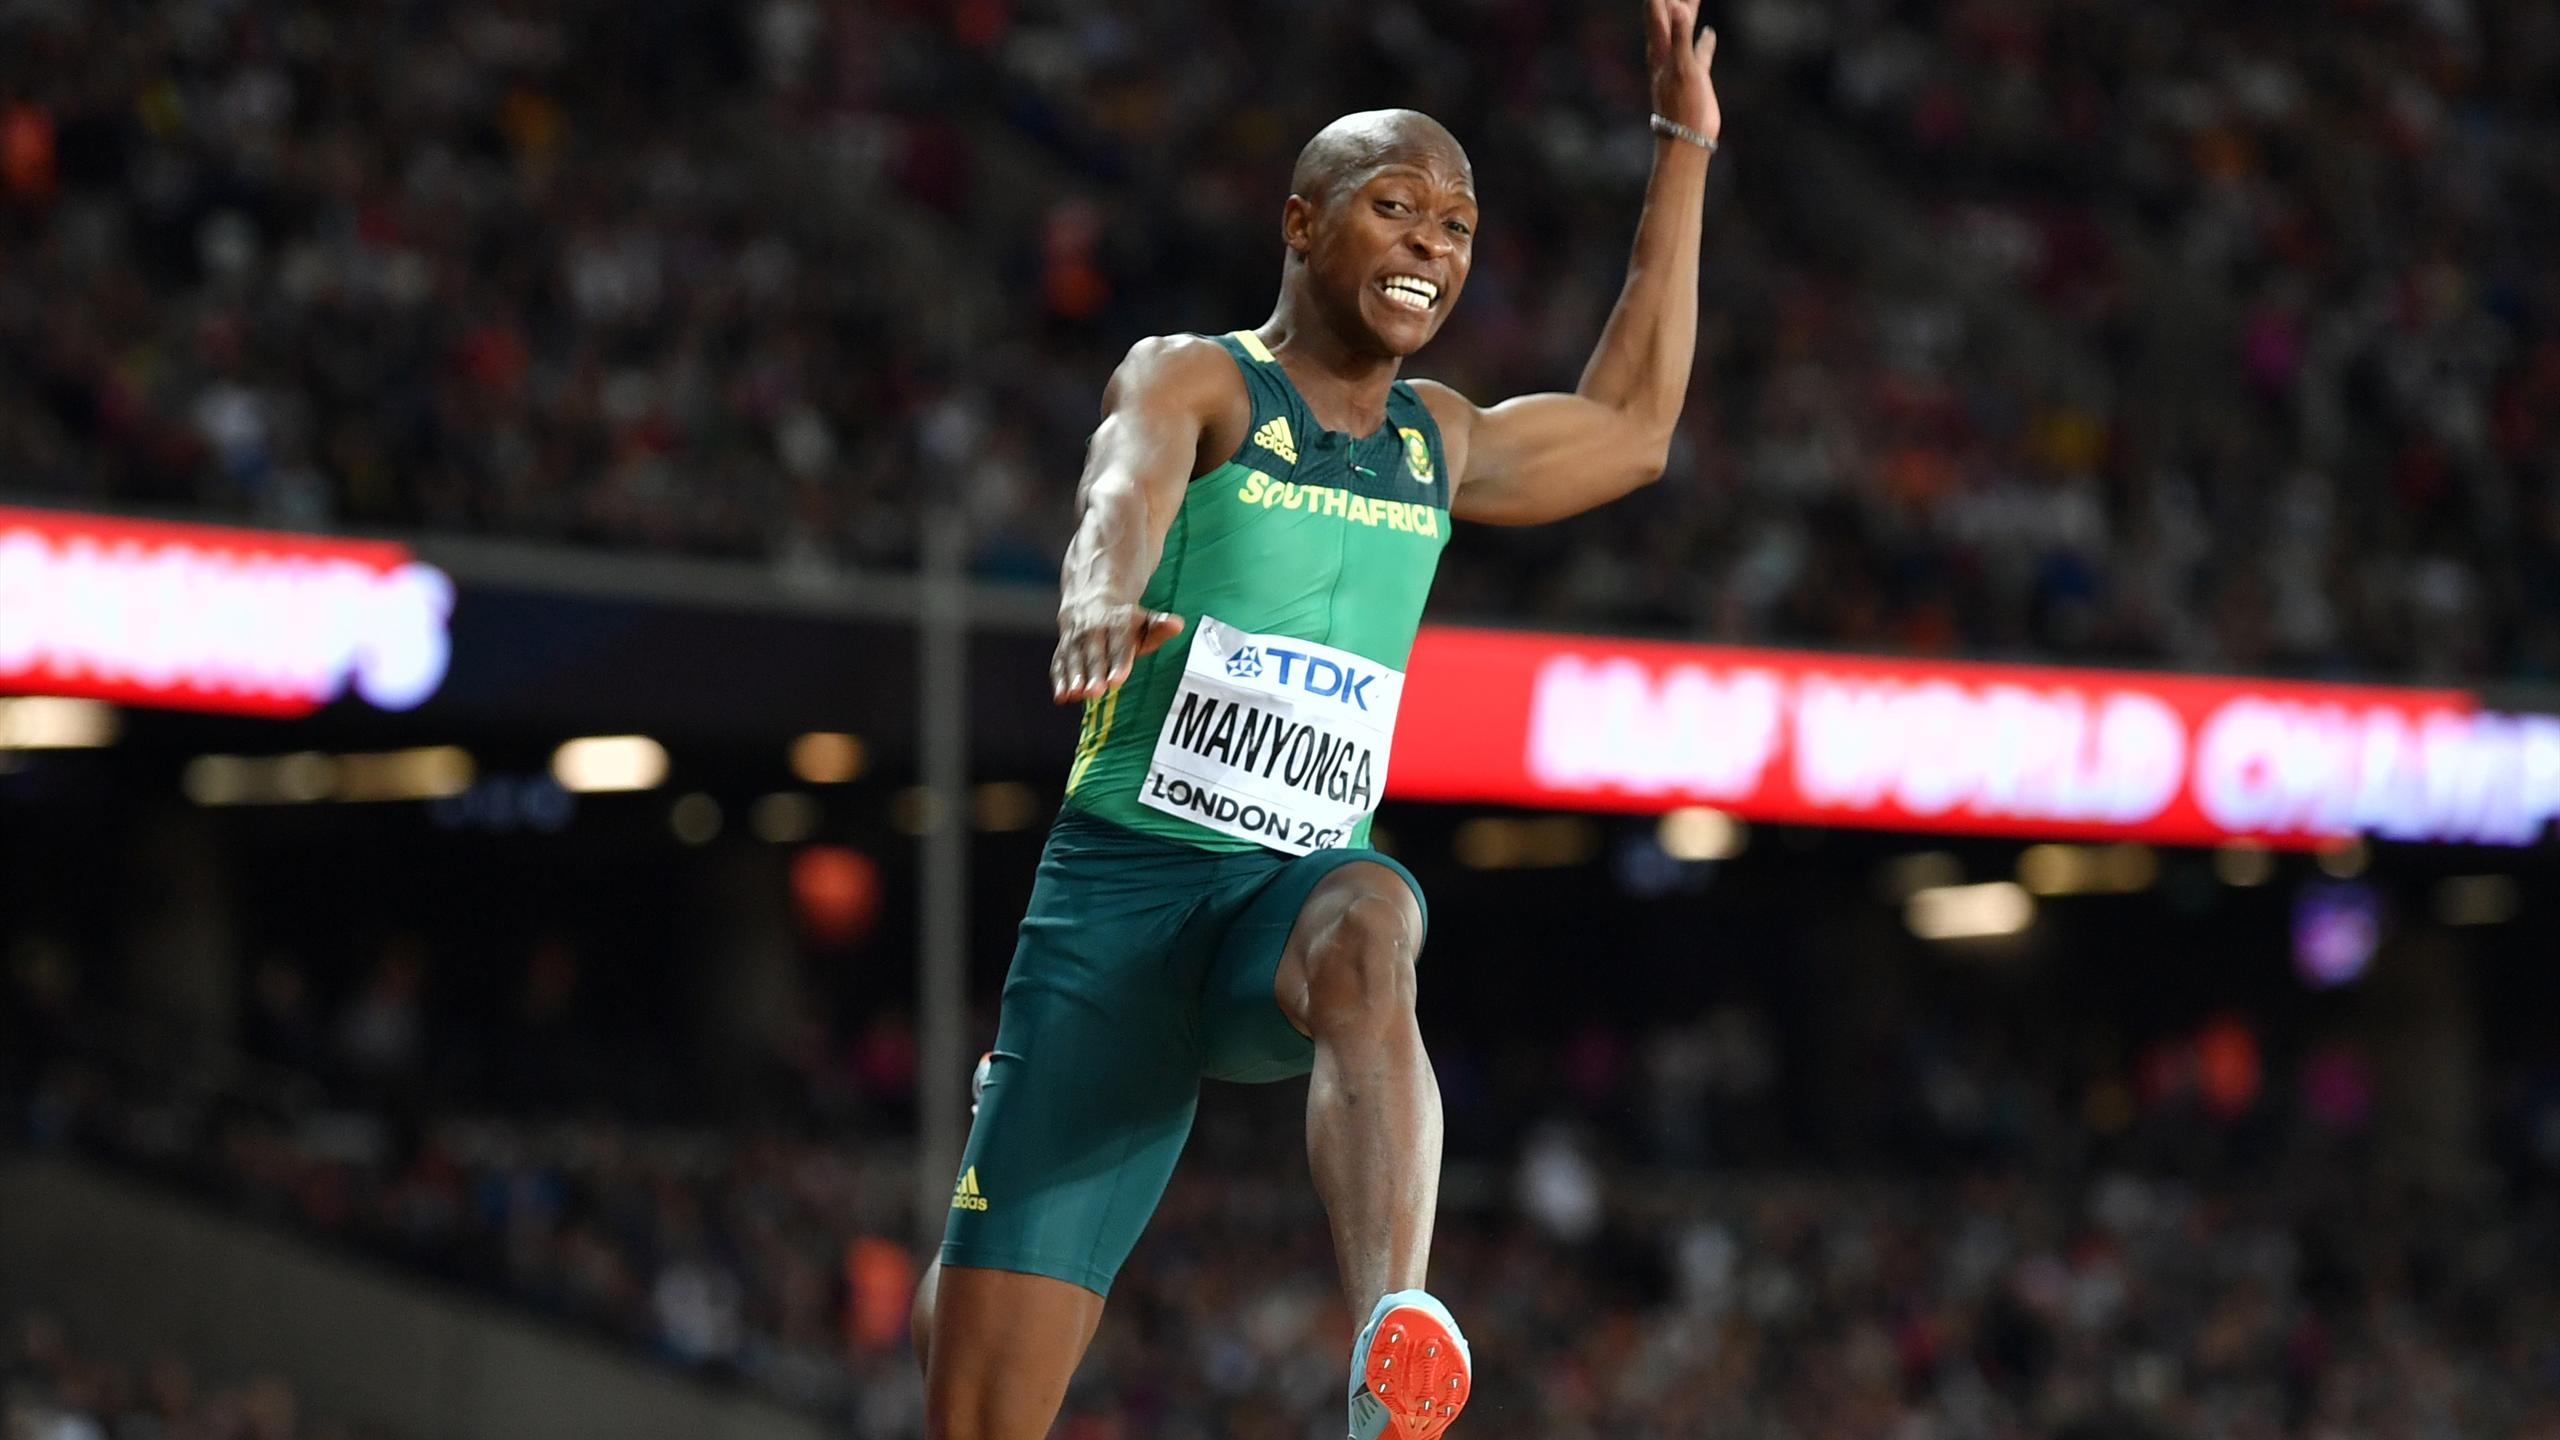 Luvo Manyonga, Doping setback, South African athlete, Struggles with addiction, 2560x1440 HD Desktop